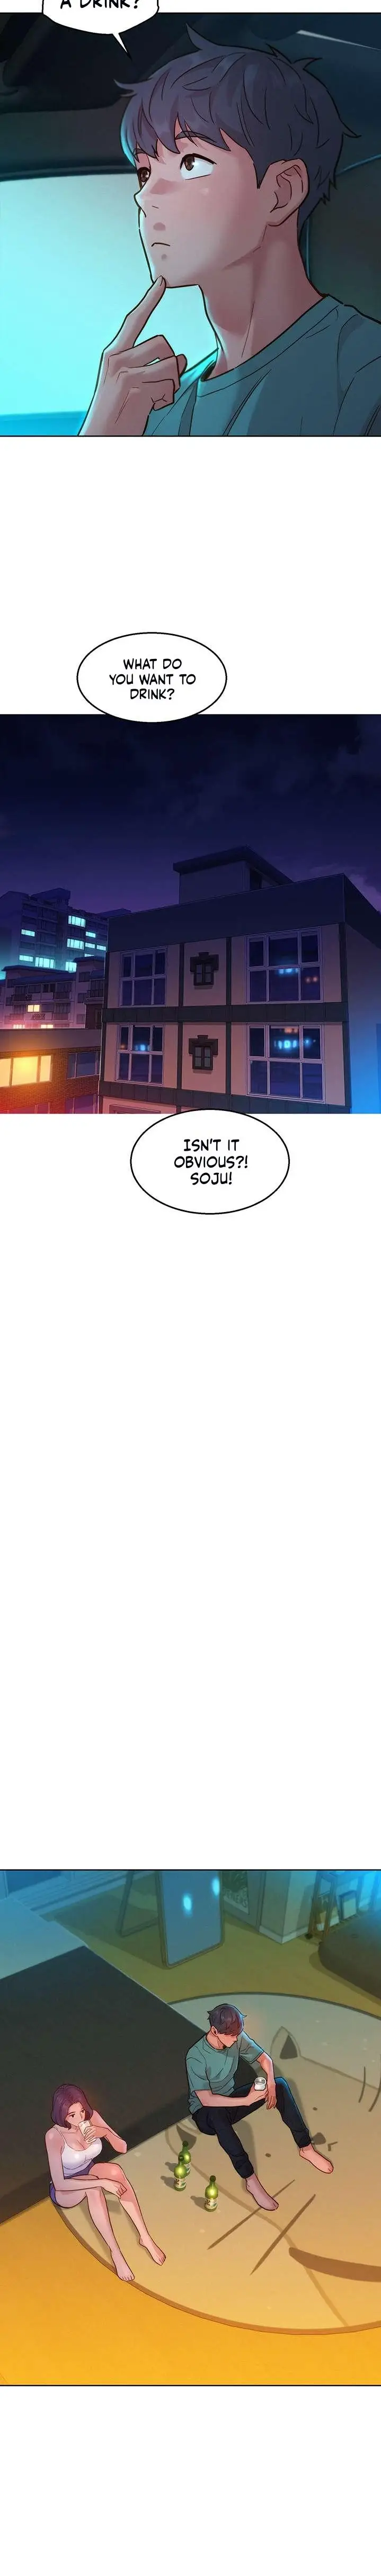 lets-hang-out-from-today-chap-26-17